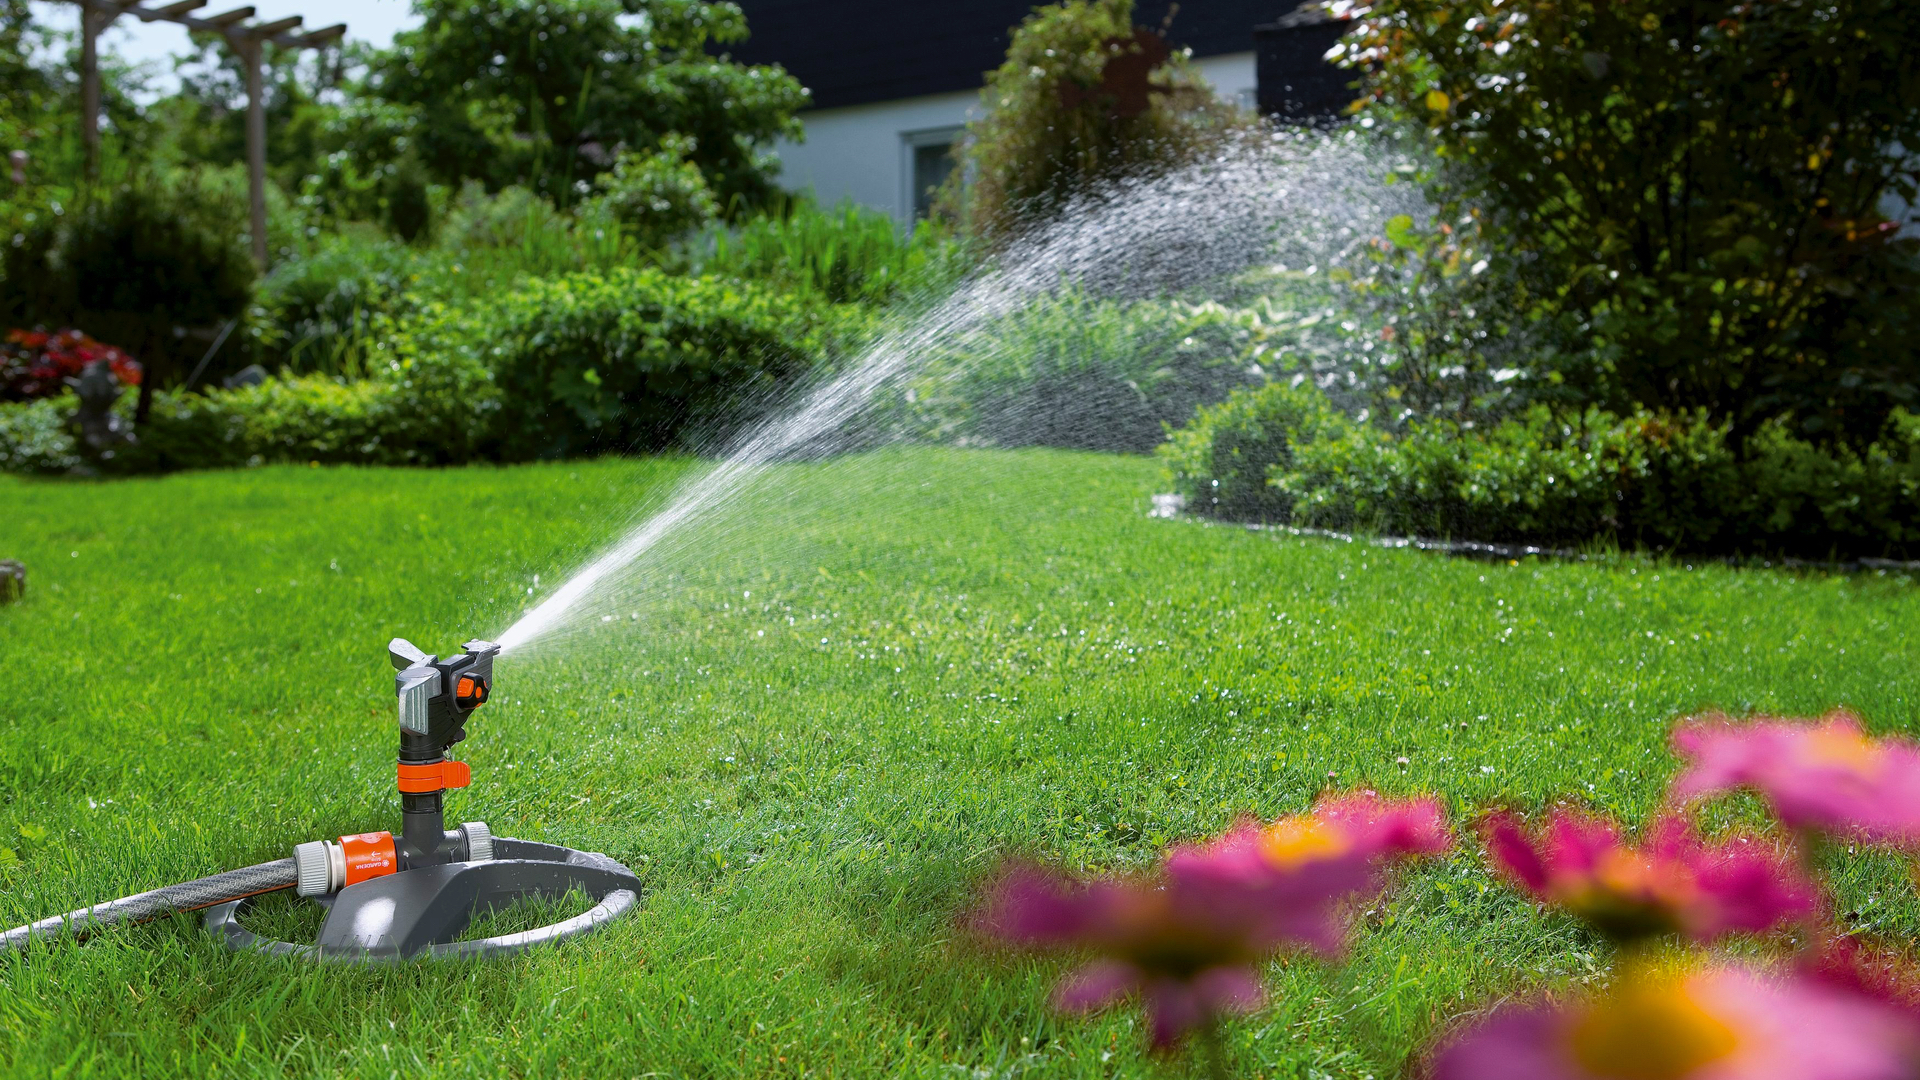 Best Lawn Sprinklers | Convenient and Easy to Use - Home Senator